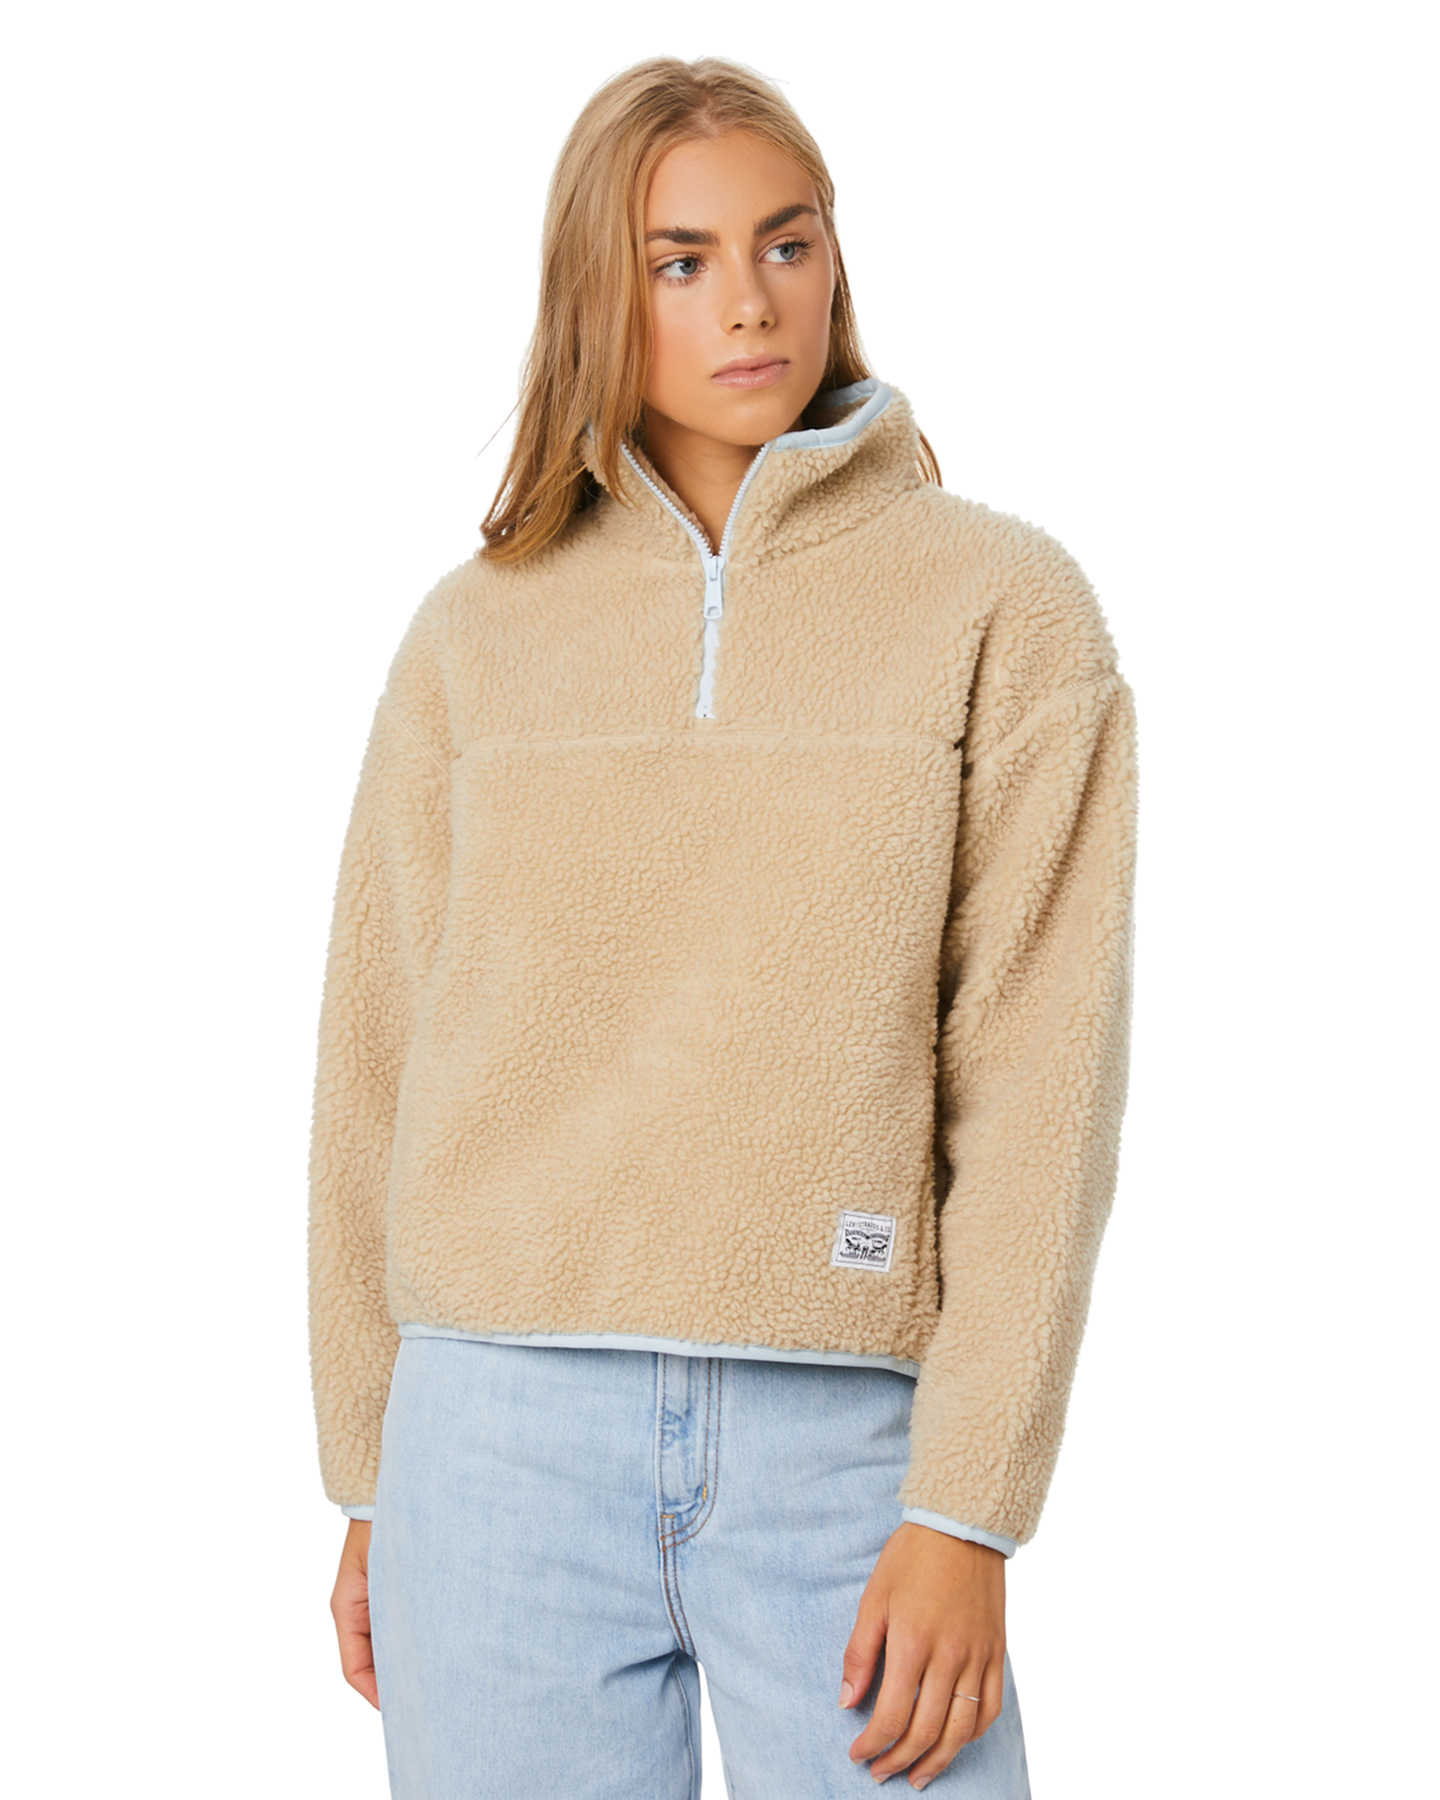 Levi's Sloane Sherpa Pullover - Oyster Gray | SurfStitch